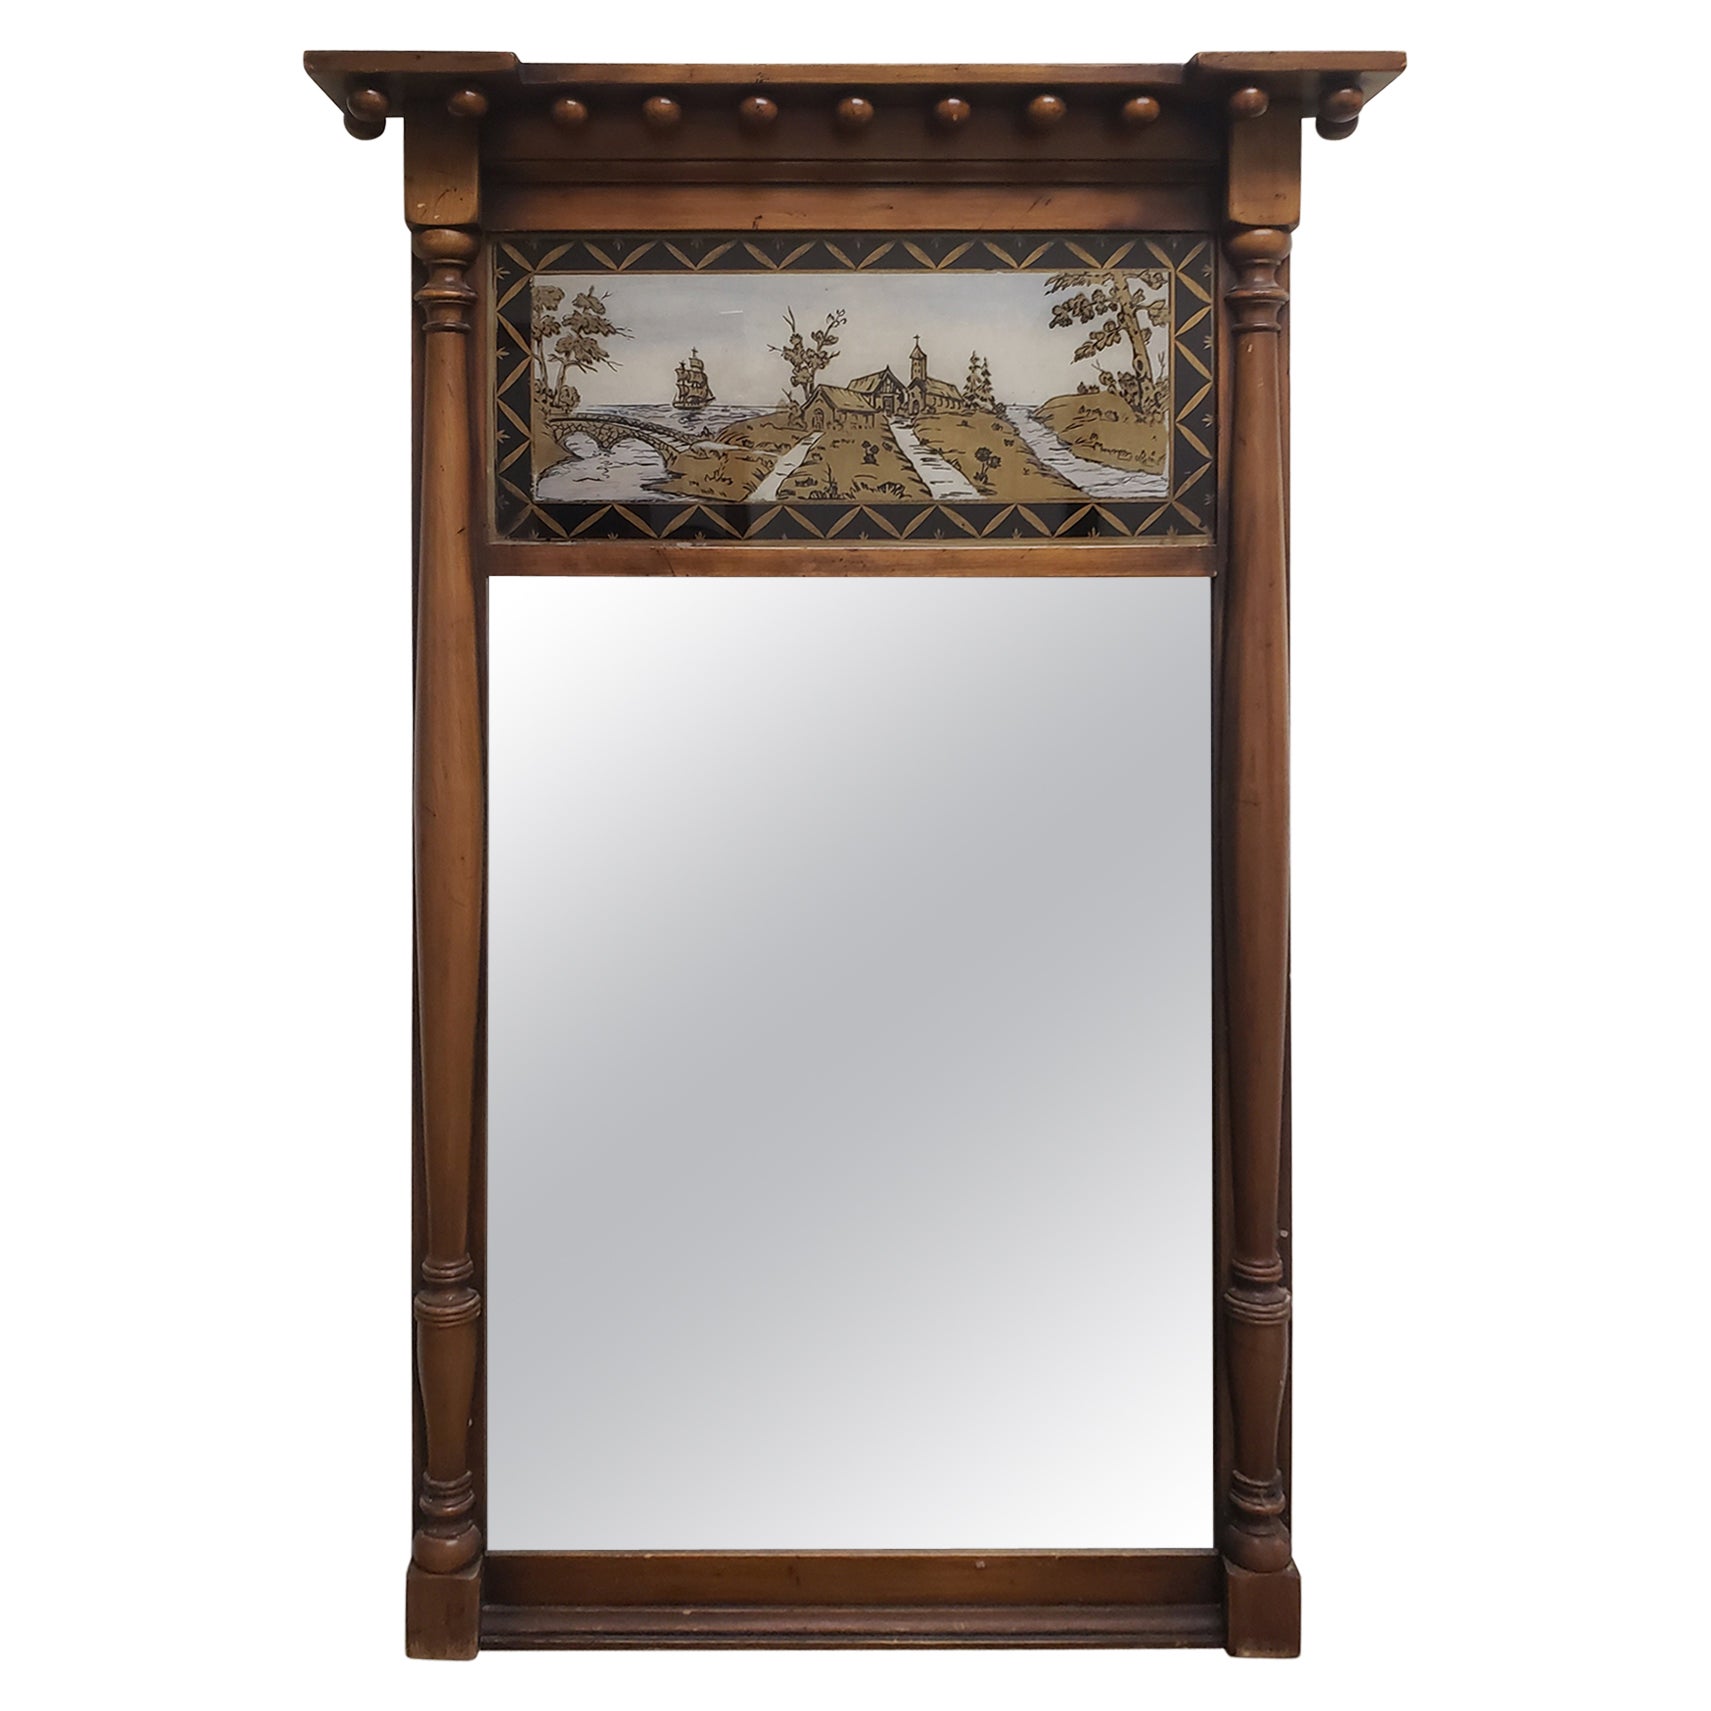 Early 20th Century Federal Style Mahogany And Eglomise Wall Trumeau Mirror For Sale